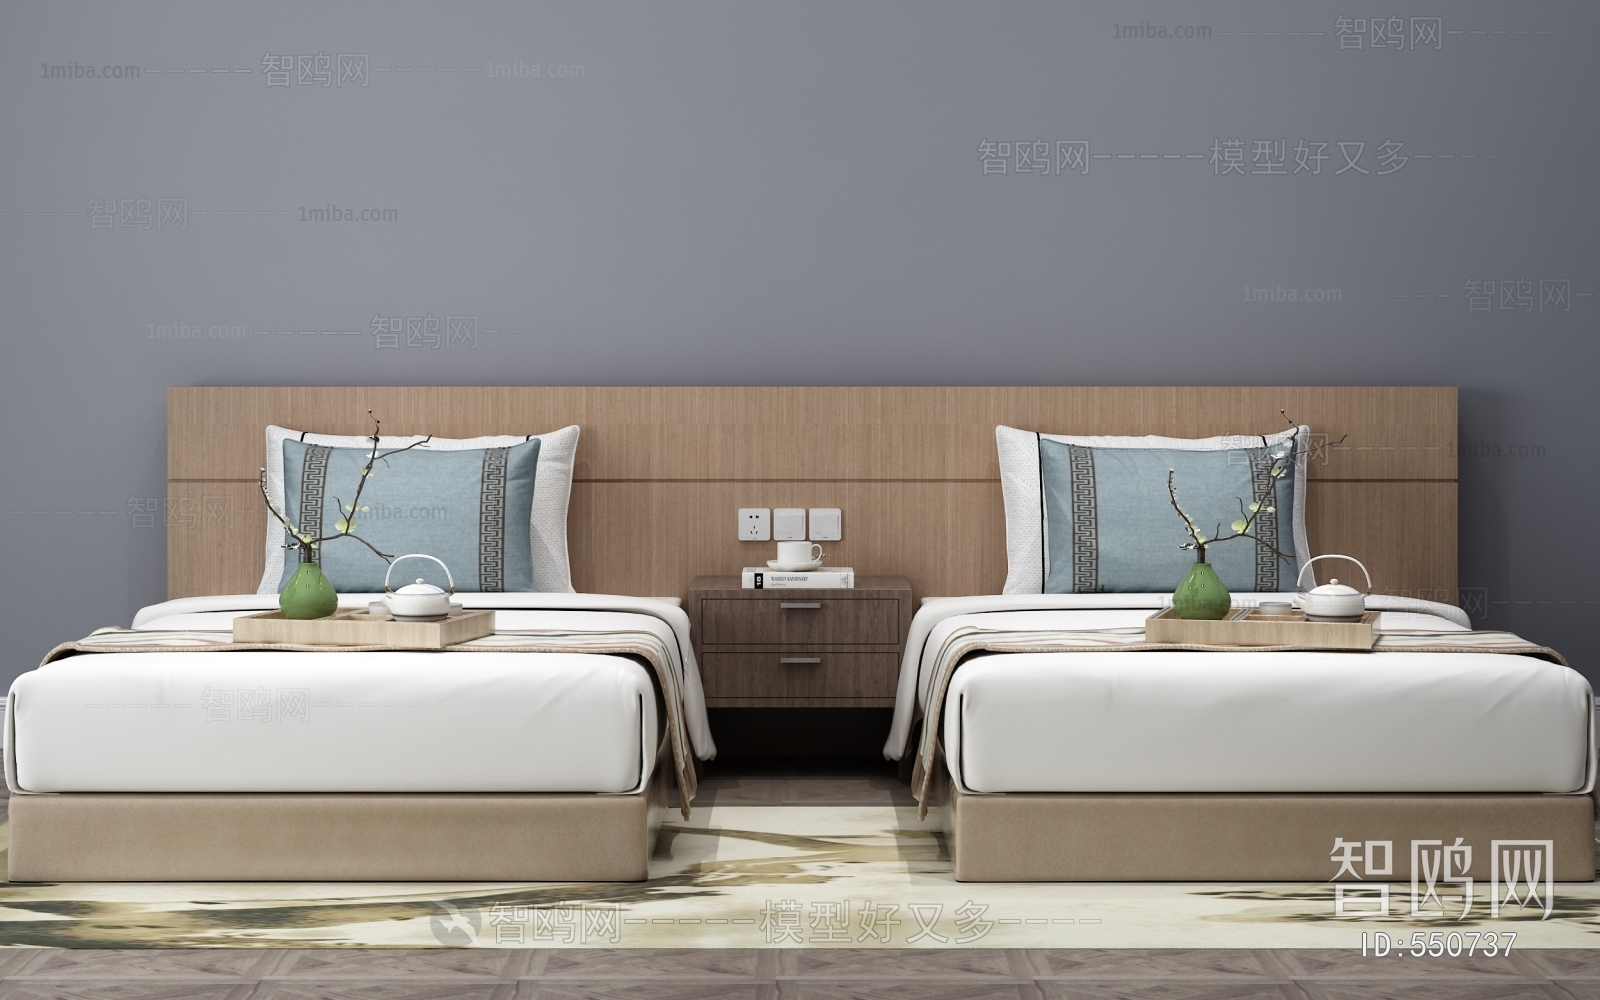 New Chinese Style Single Bed